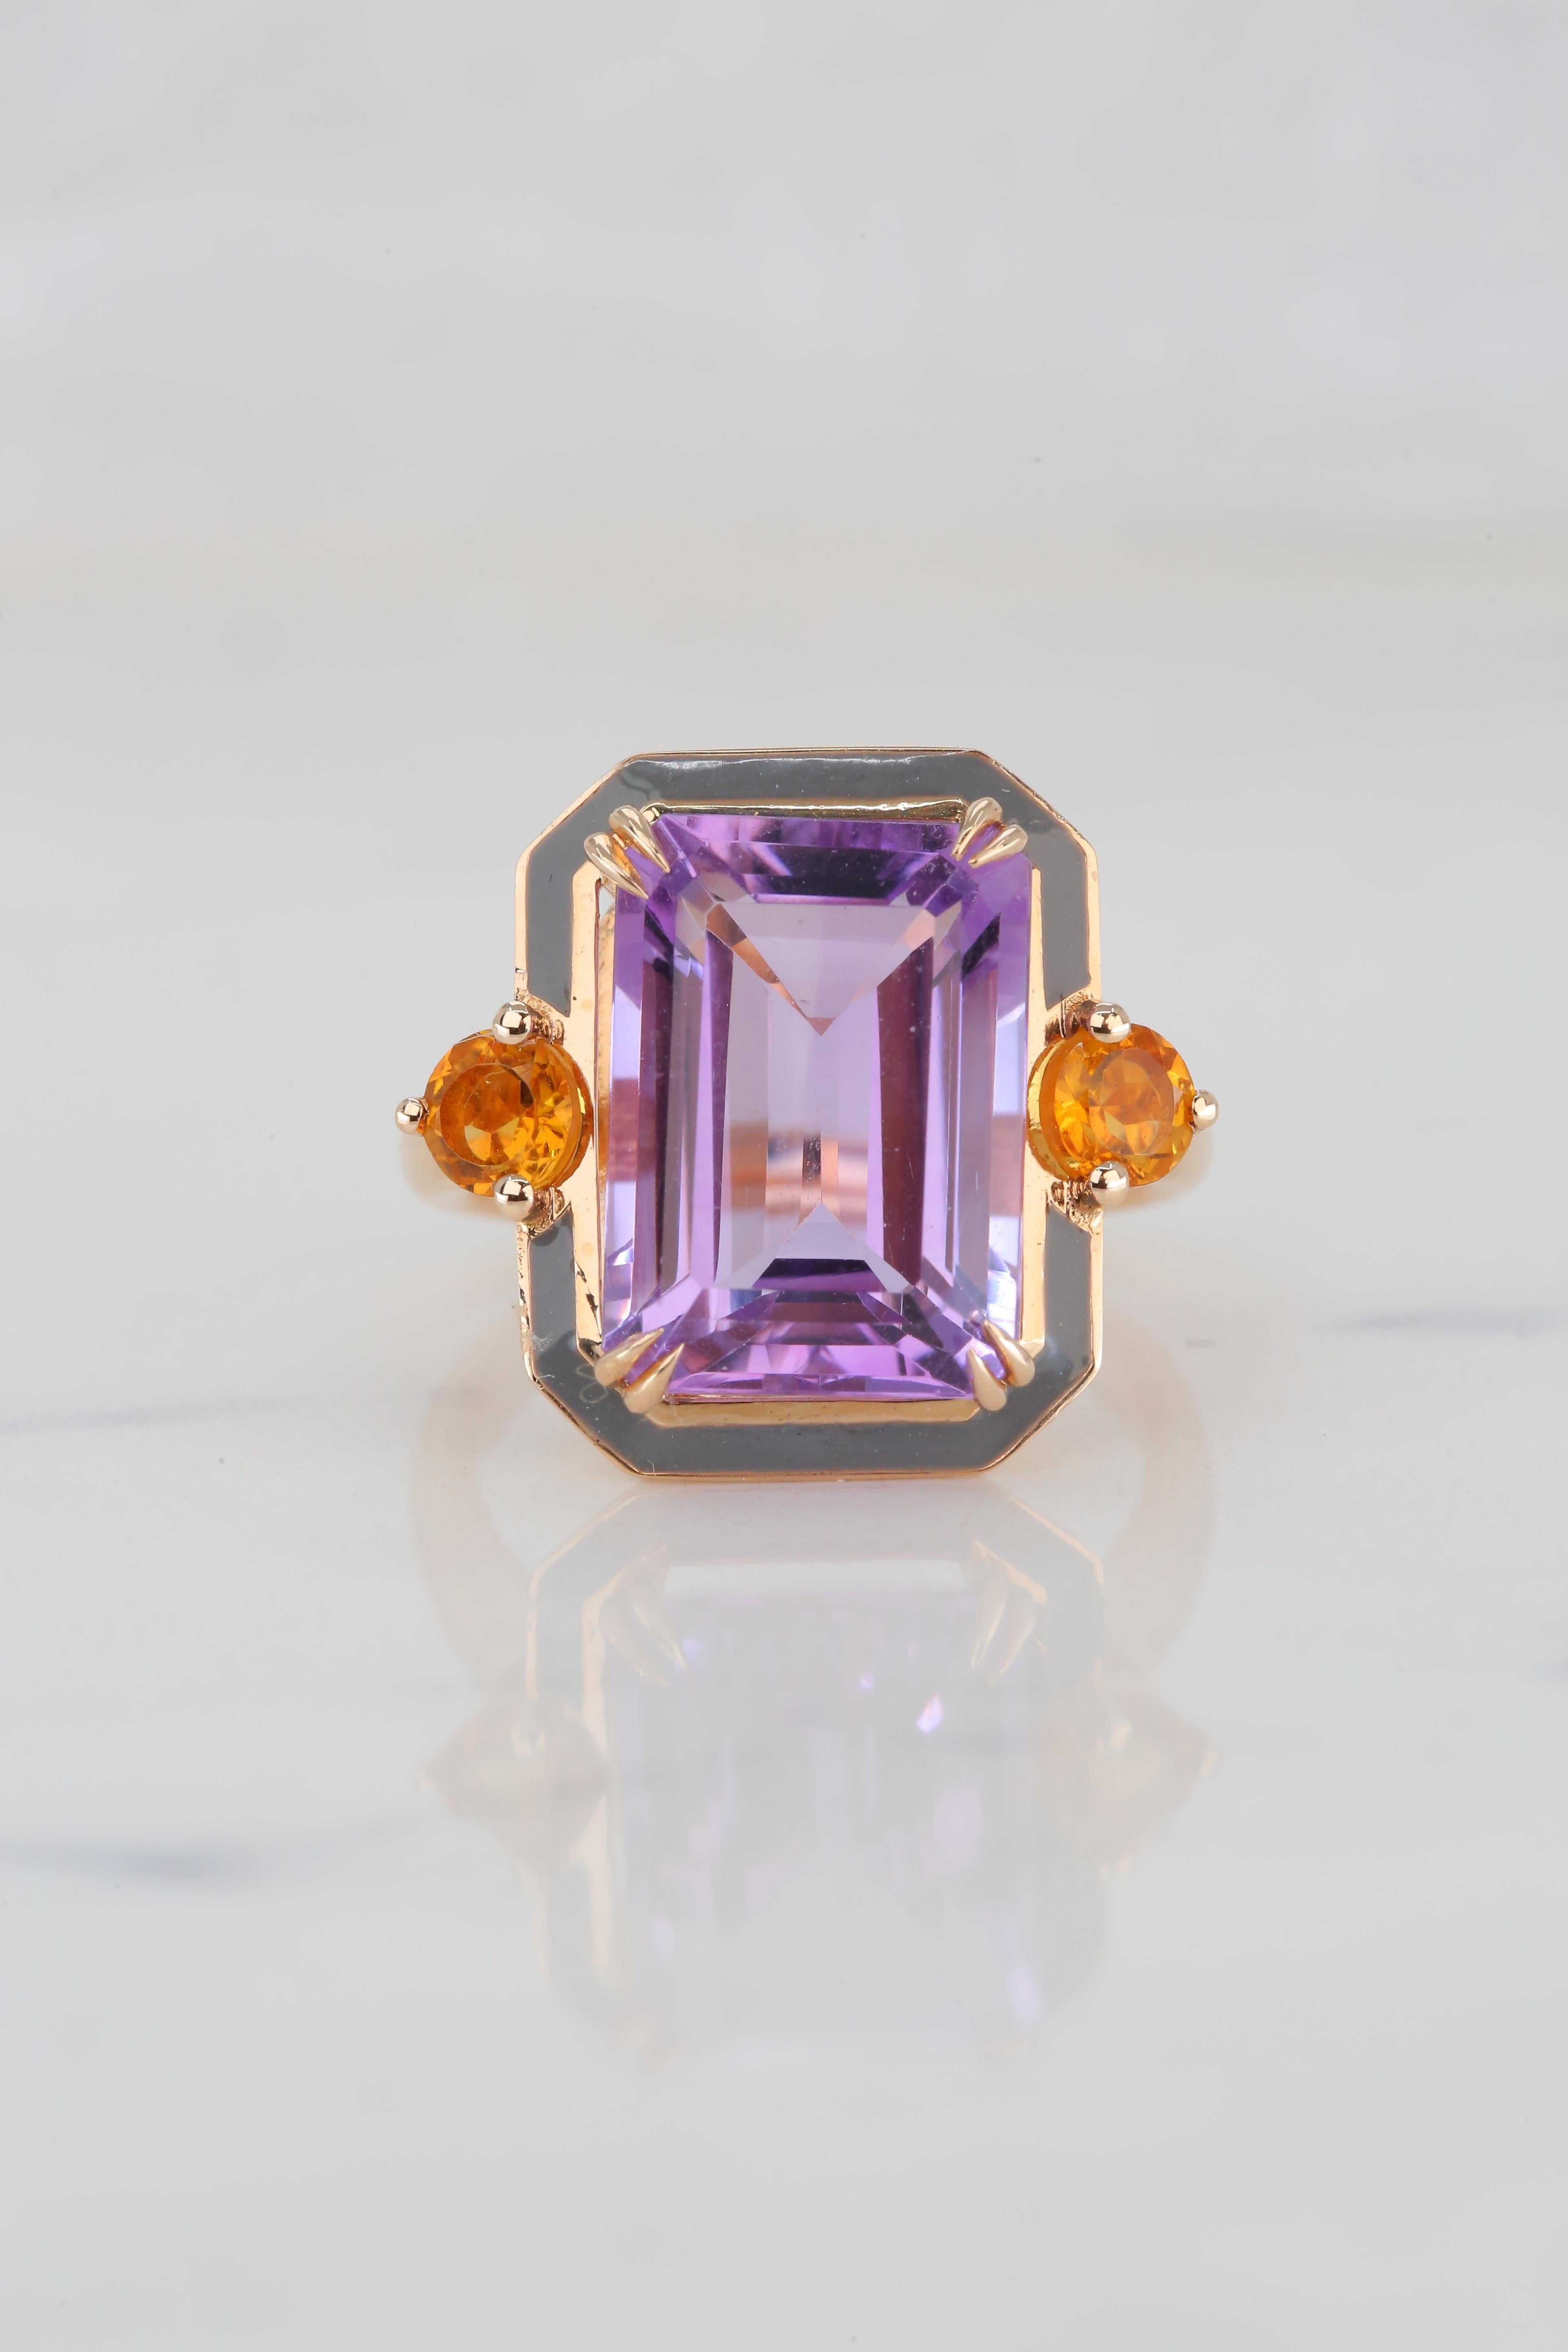 For Sale:  Art Deco Style Grey , Enameled Amethyst and Citrine 14K Gold Cocktail Ring 4